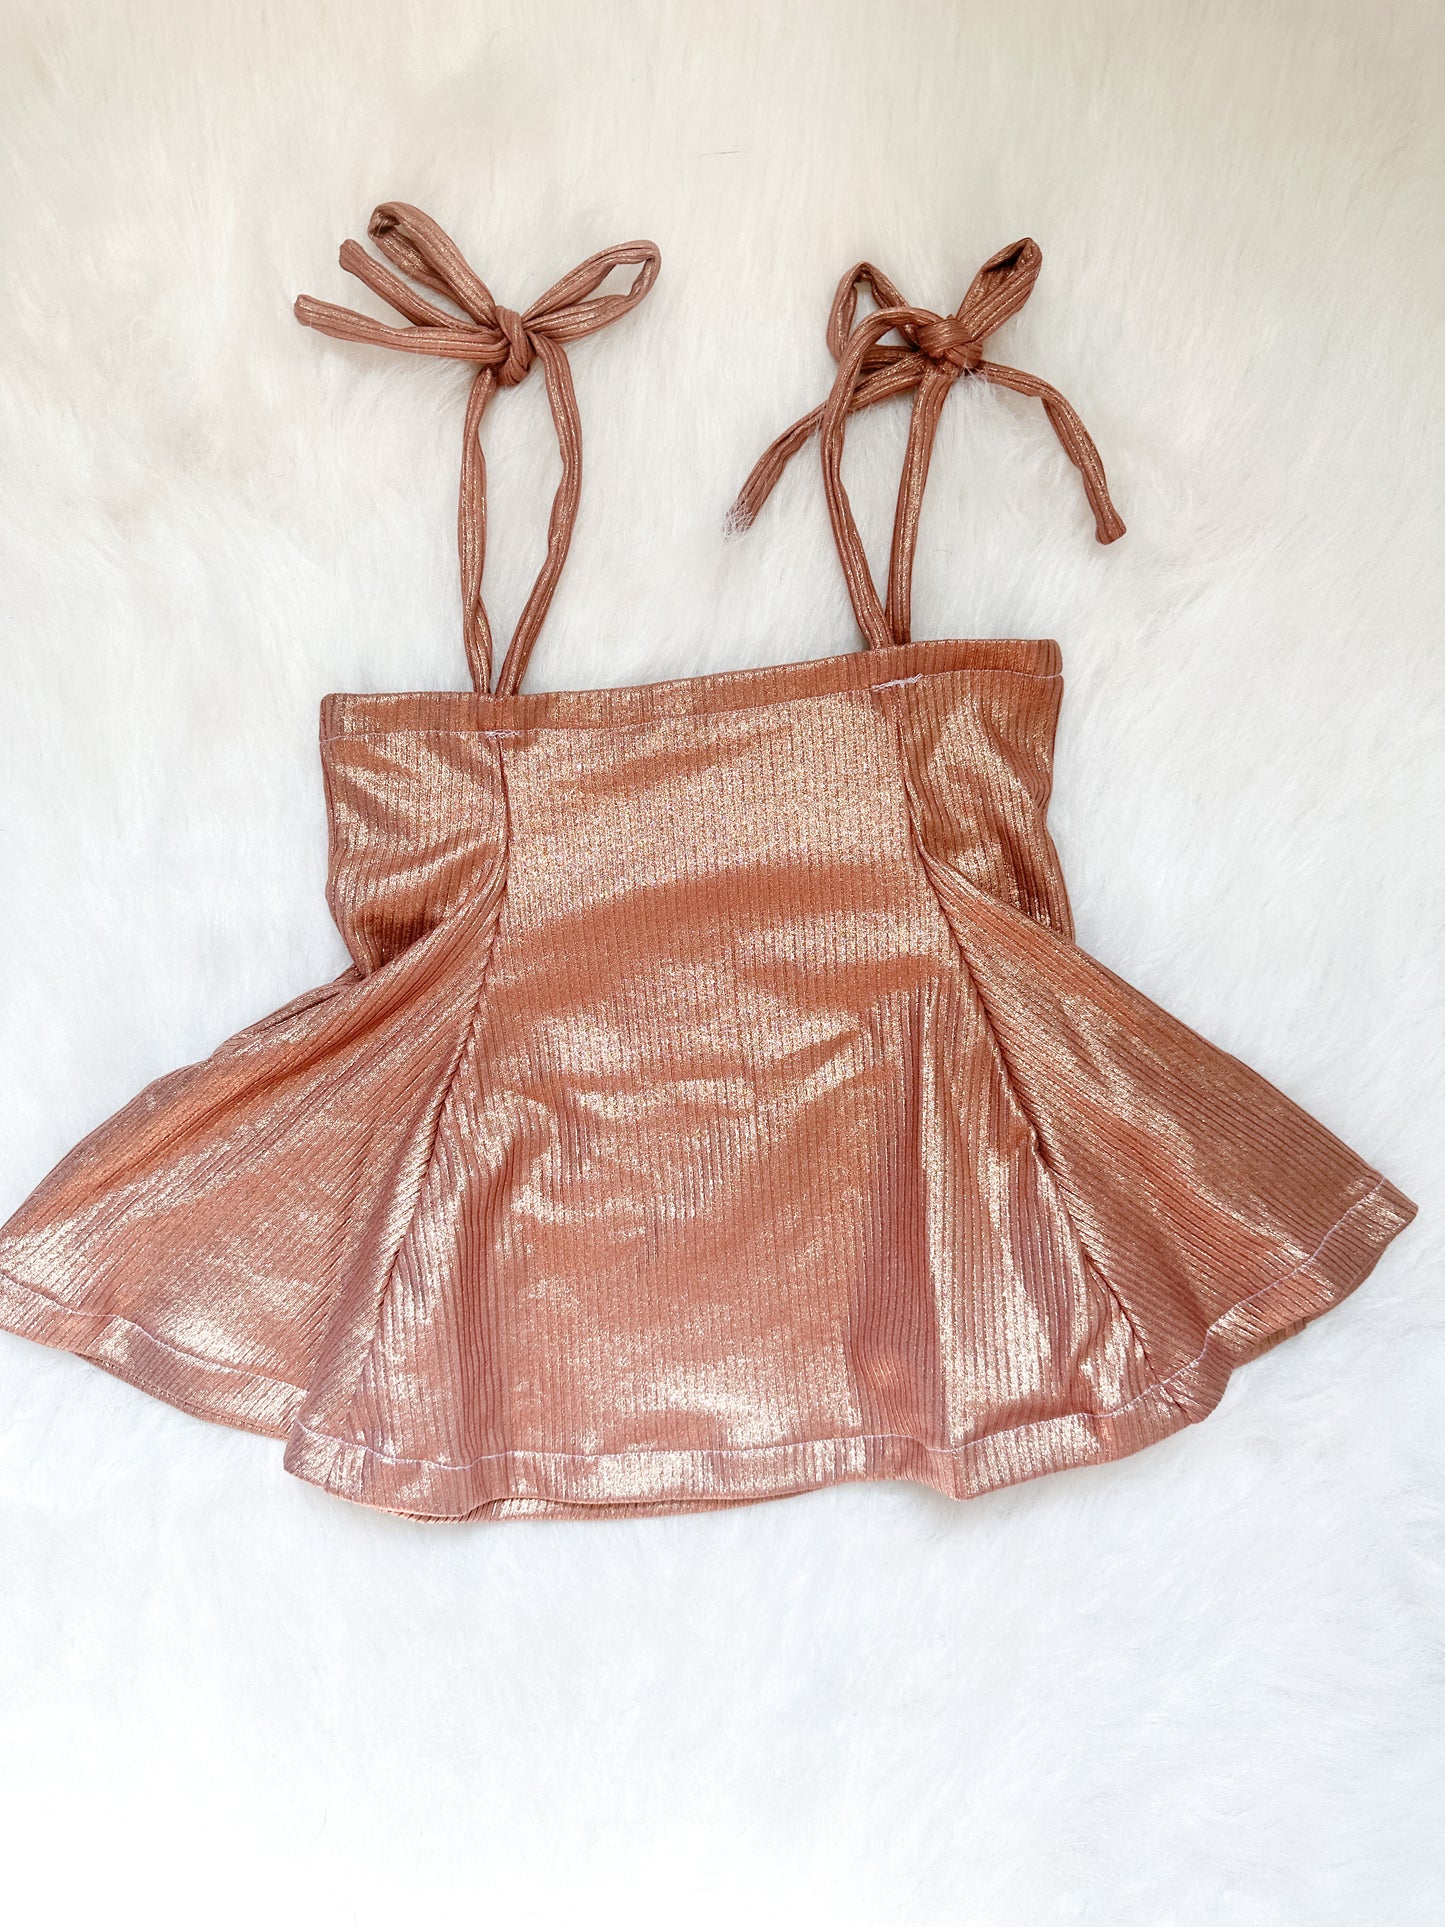 Shimmer tie skirts